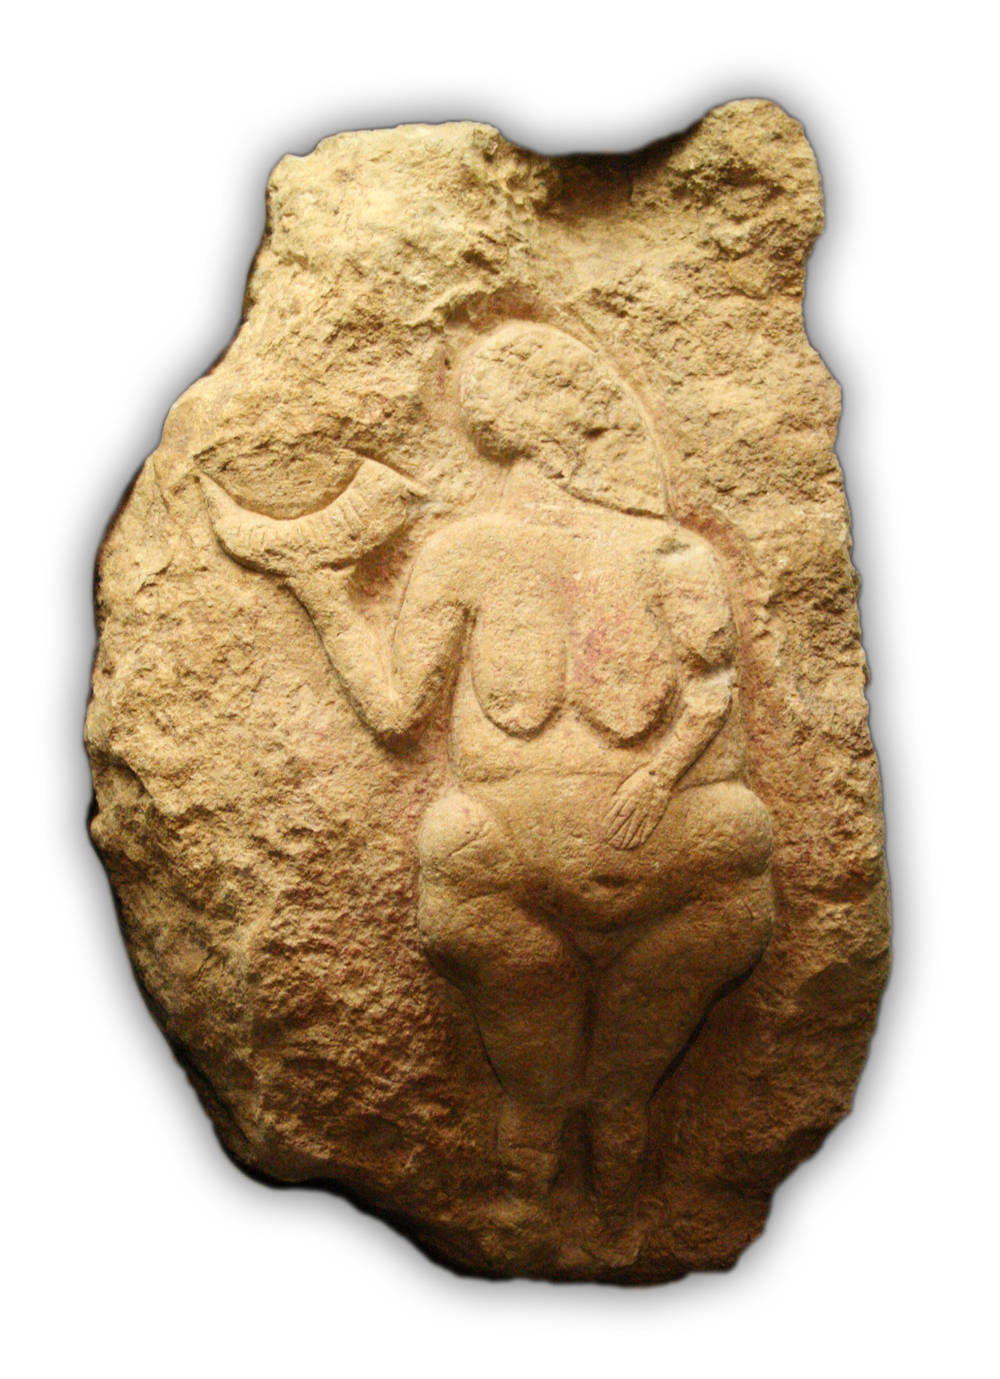 Venus of Laussel holding horn with 13 notches, marking the moon and mense